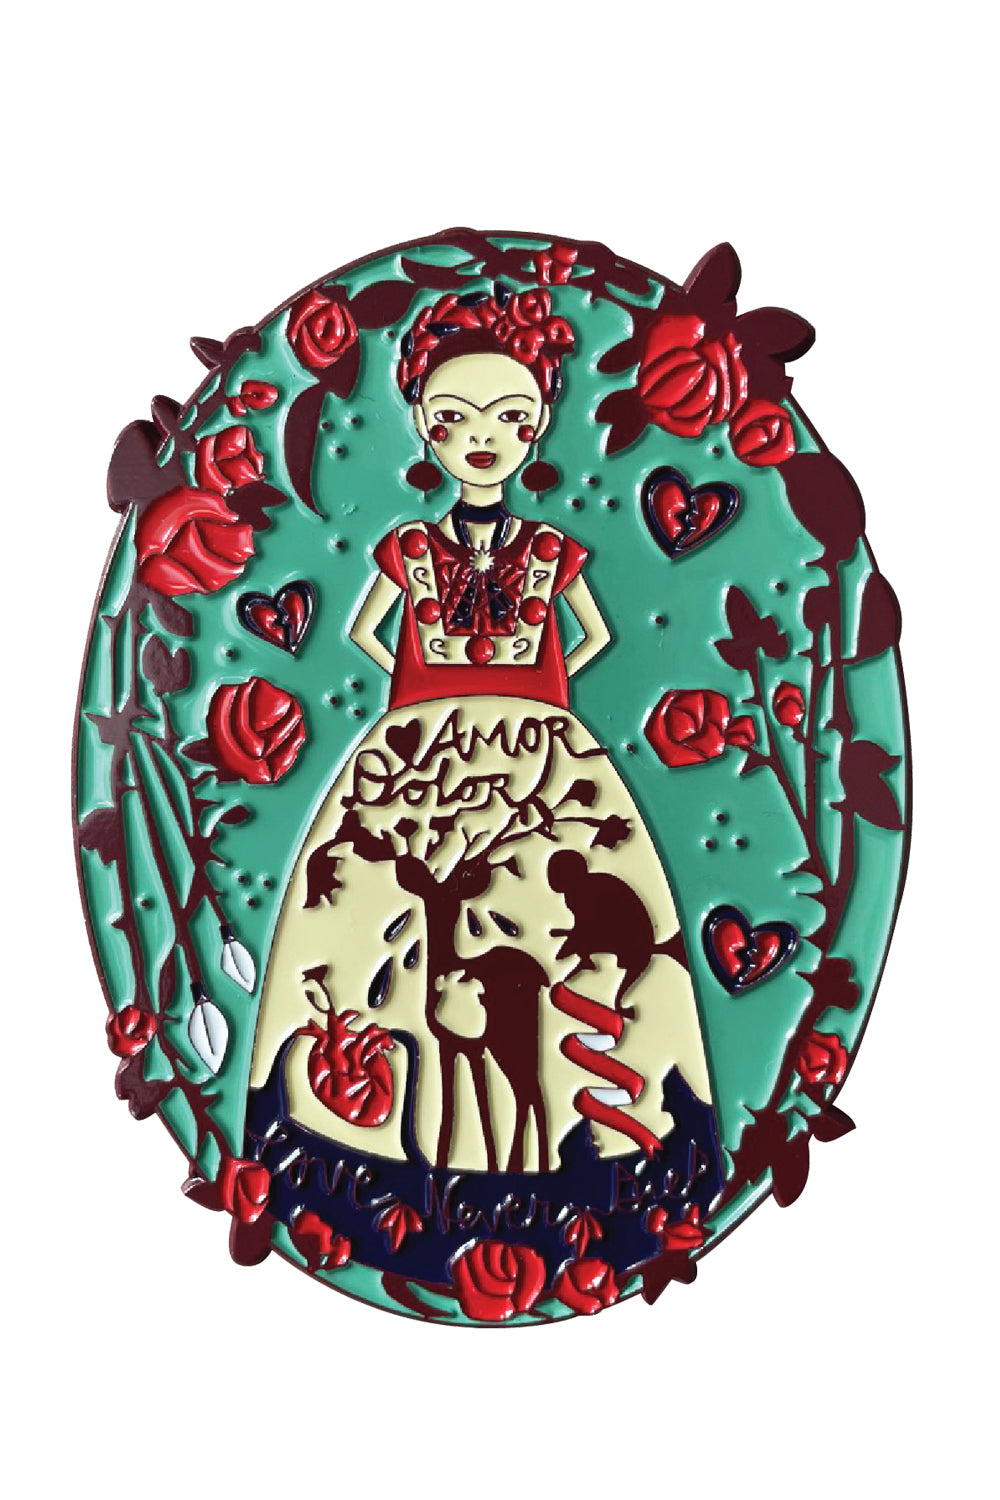 Jade green, red, and white enamel pin featuring a female artist, deer, monkey, and flowers with "Love Never Dies" text